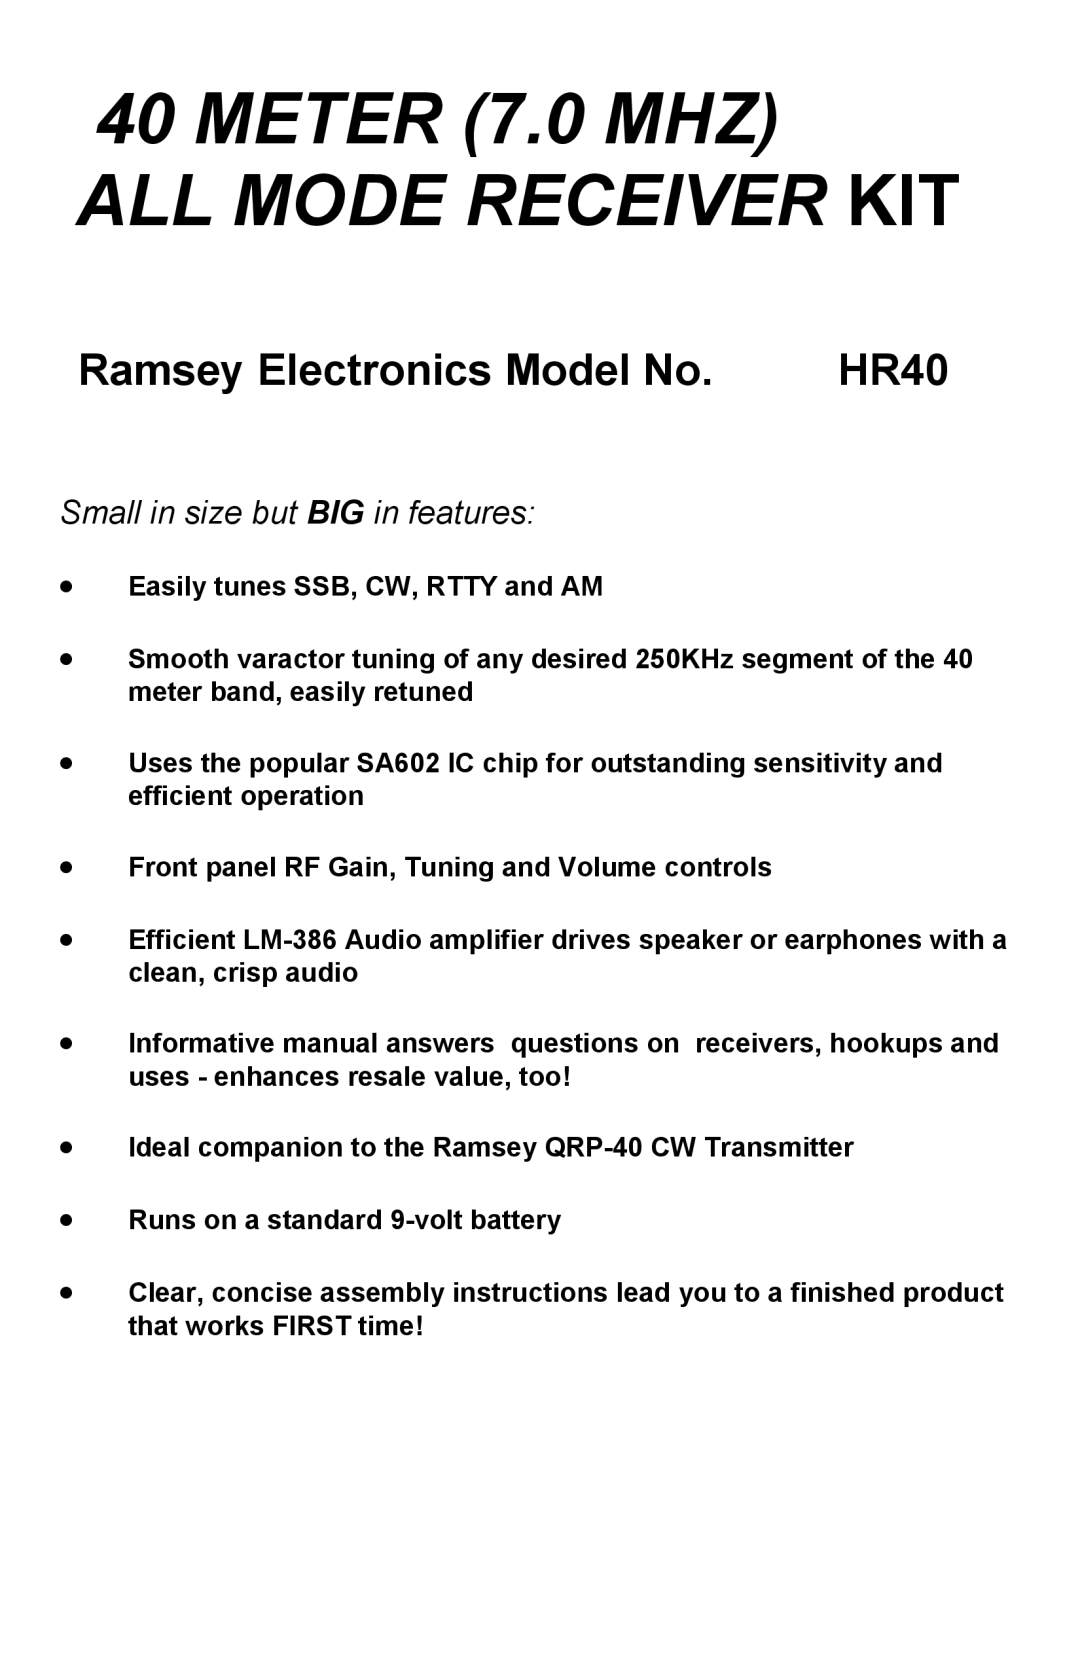 Ramsey Electronics HR40 manual METER 7.0 MHZ ALL MODE RECEIVER KIT, Ramsey Electronics Model No 